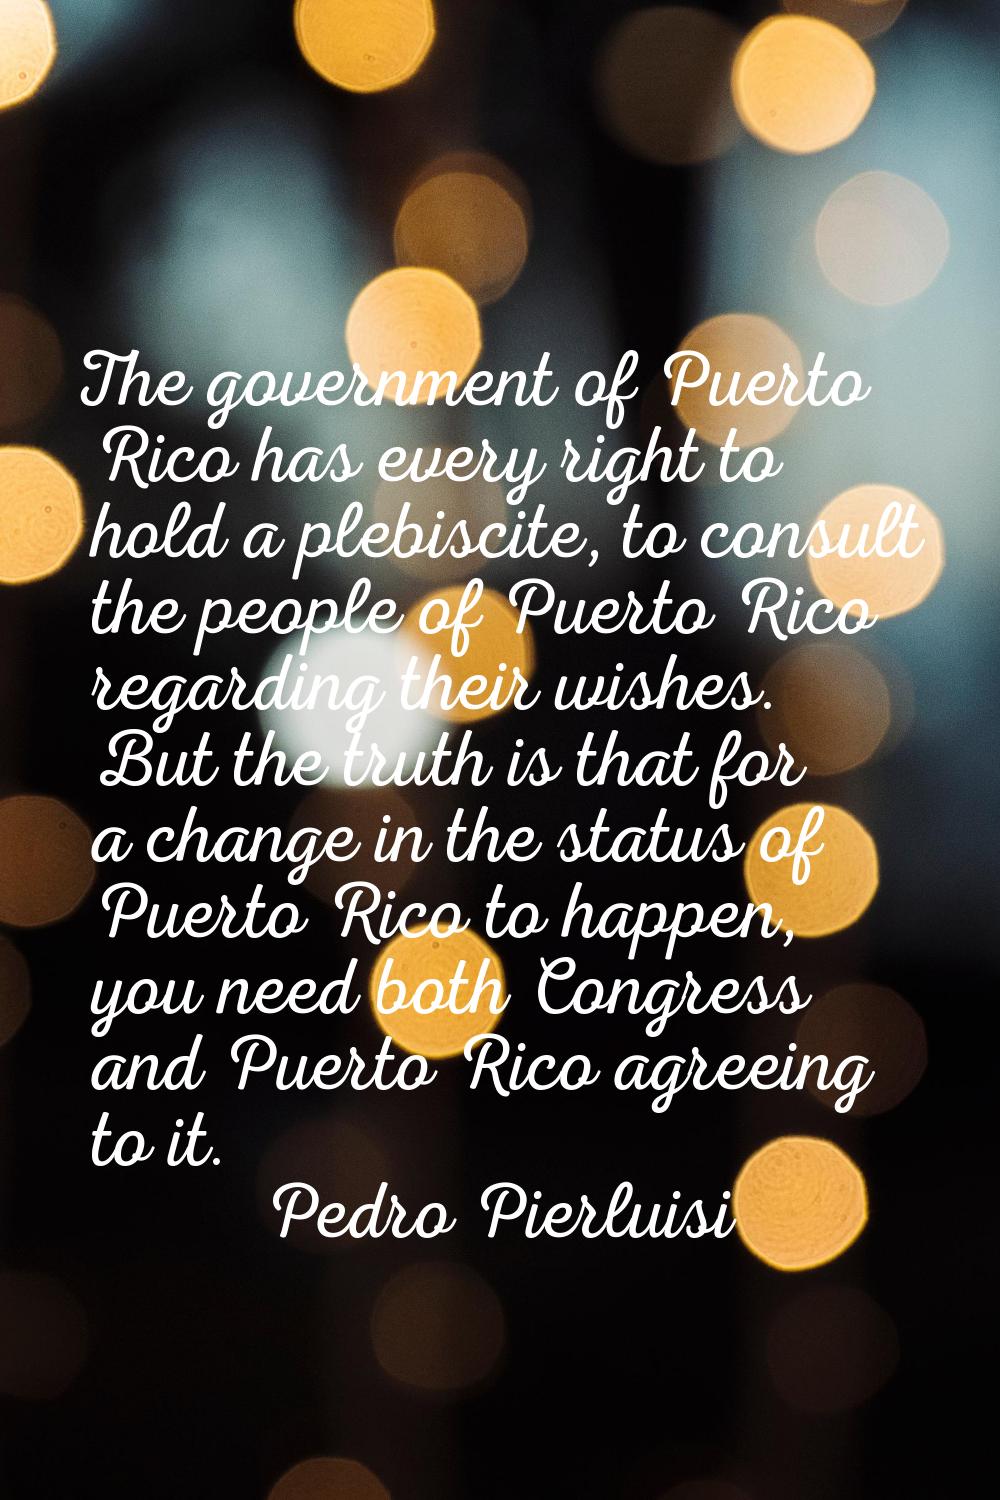 The government of Puerto Rico has every right to hold a plebiscite, to consult the people of Puerto